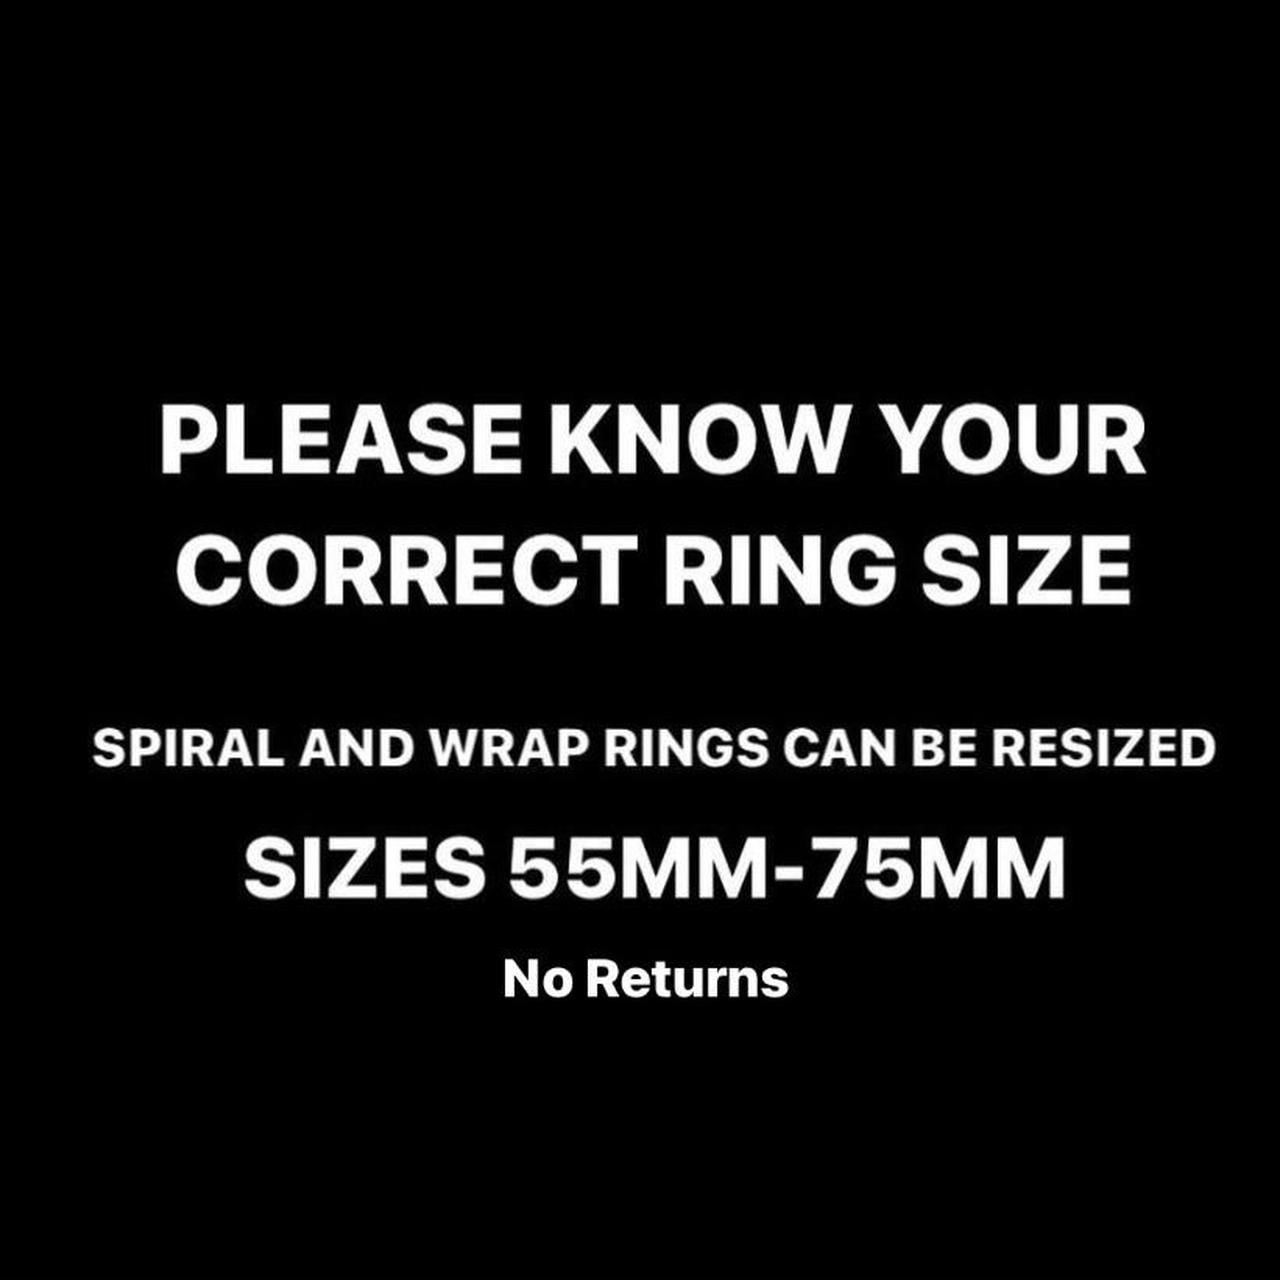 Please Know Your Rings Size When Ordering Returns... - Depop